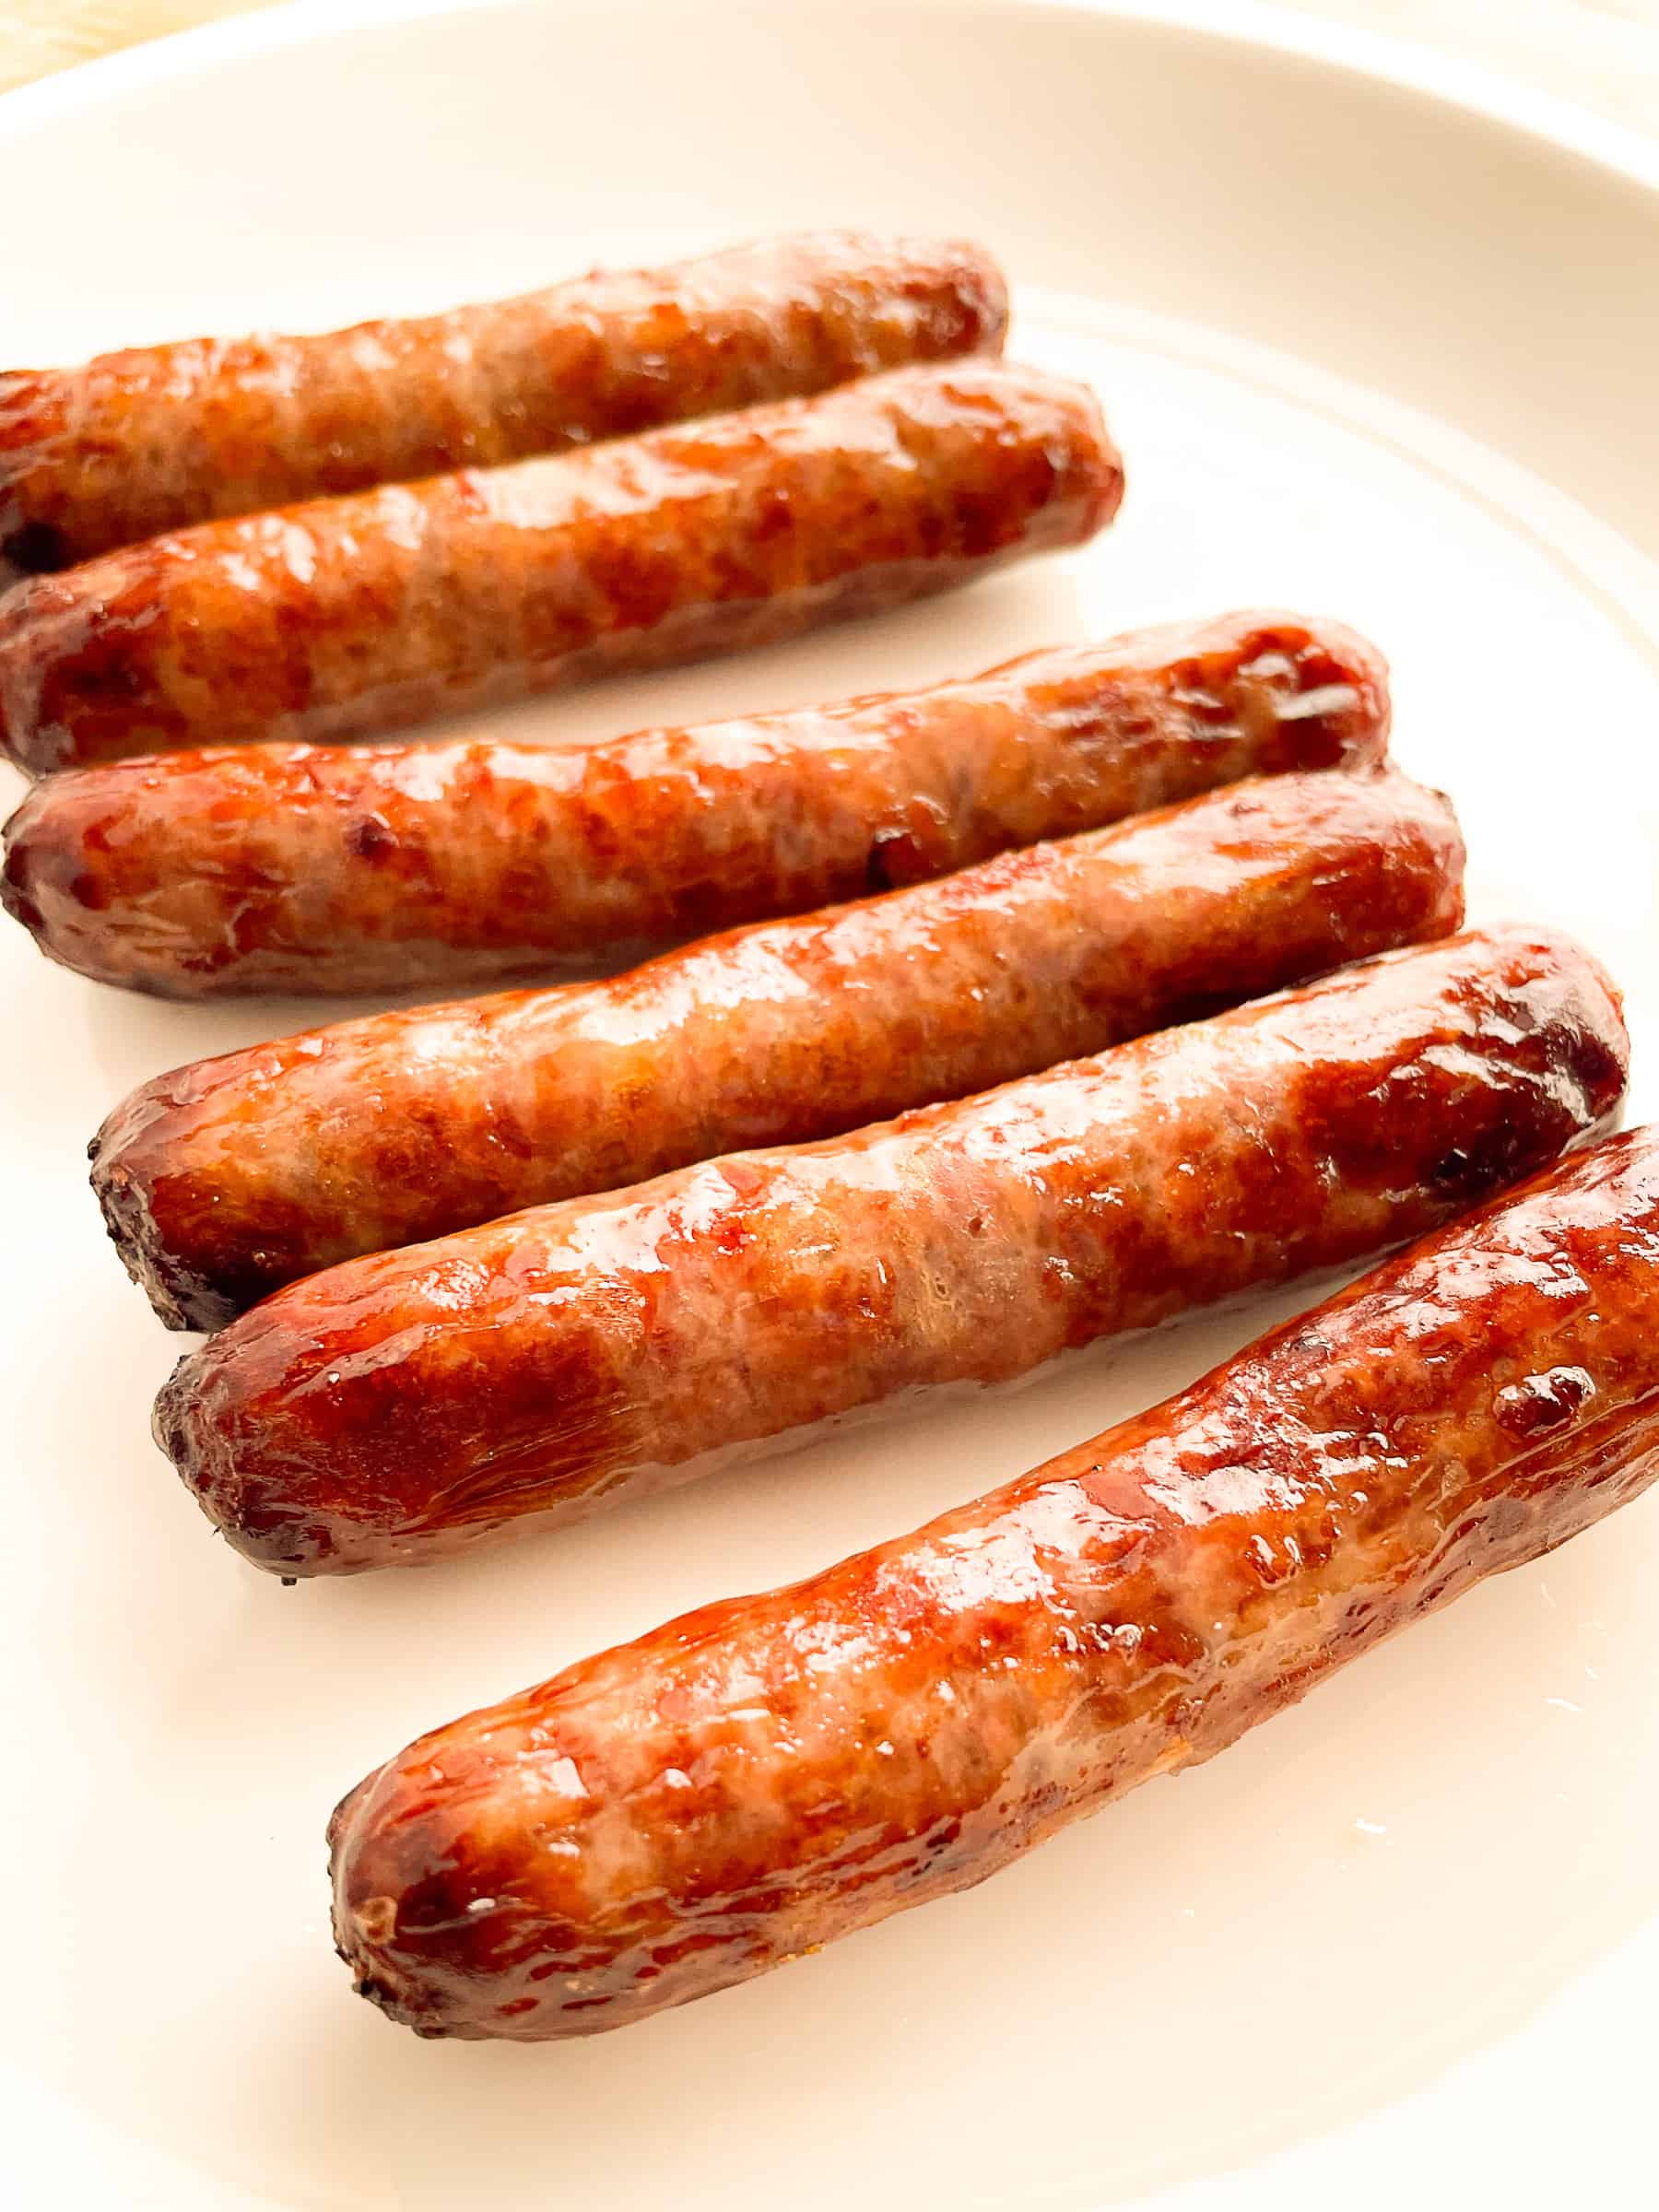 Air fried breakfast sausage links on a white plate.